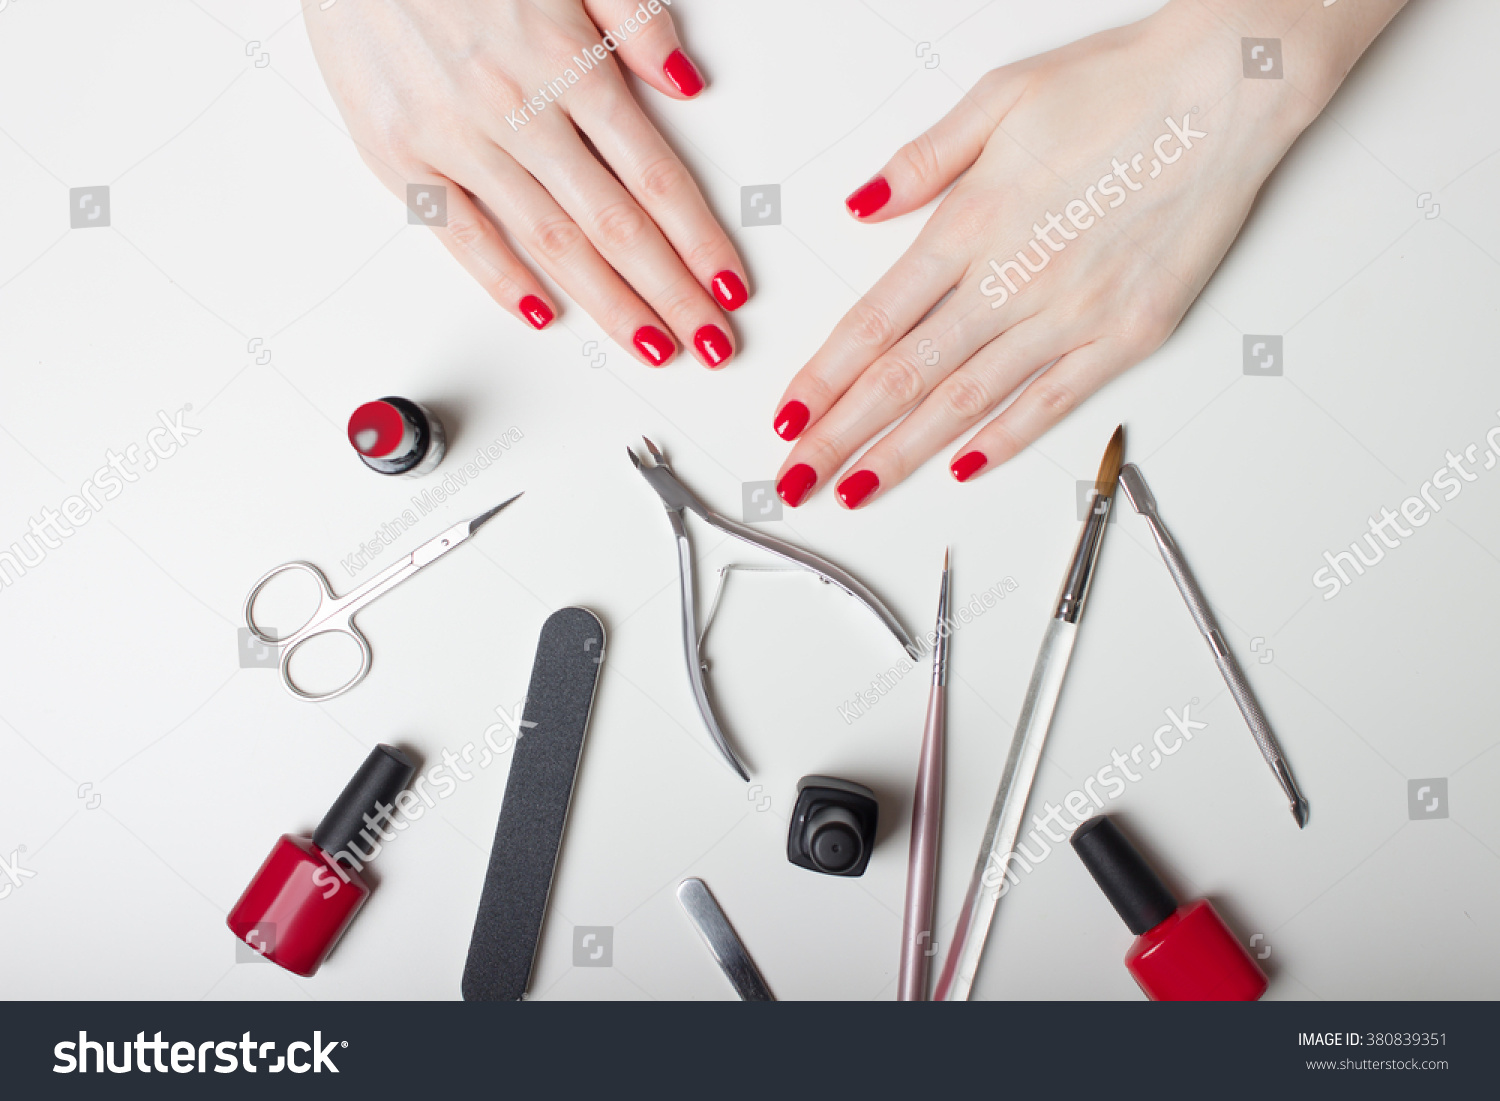 Manicure - Beautiful manicured woman's nails with red nail polish #380839351